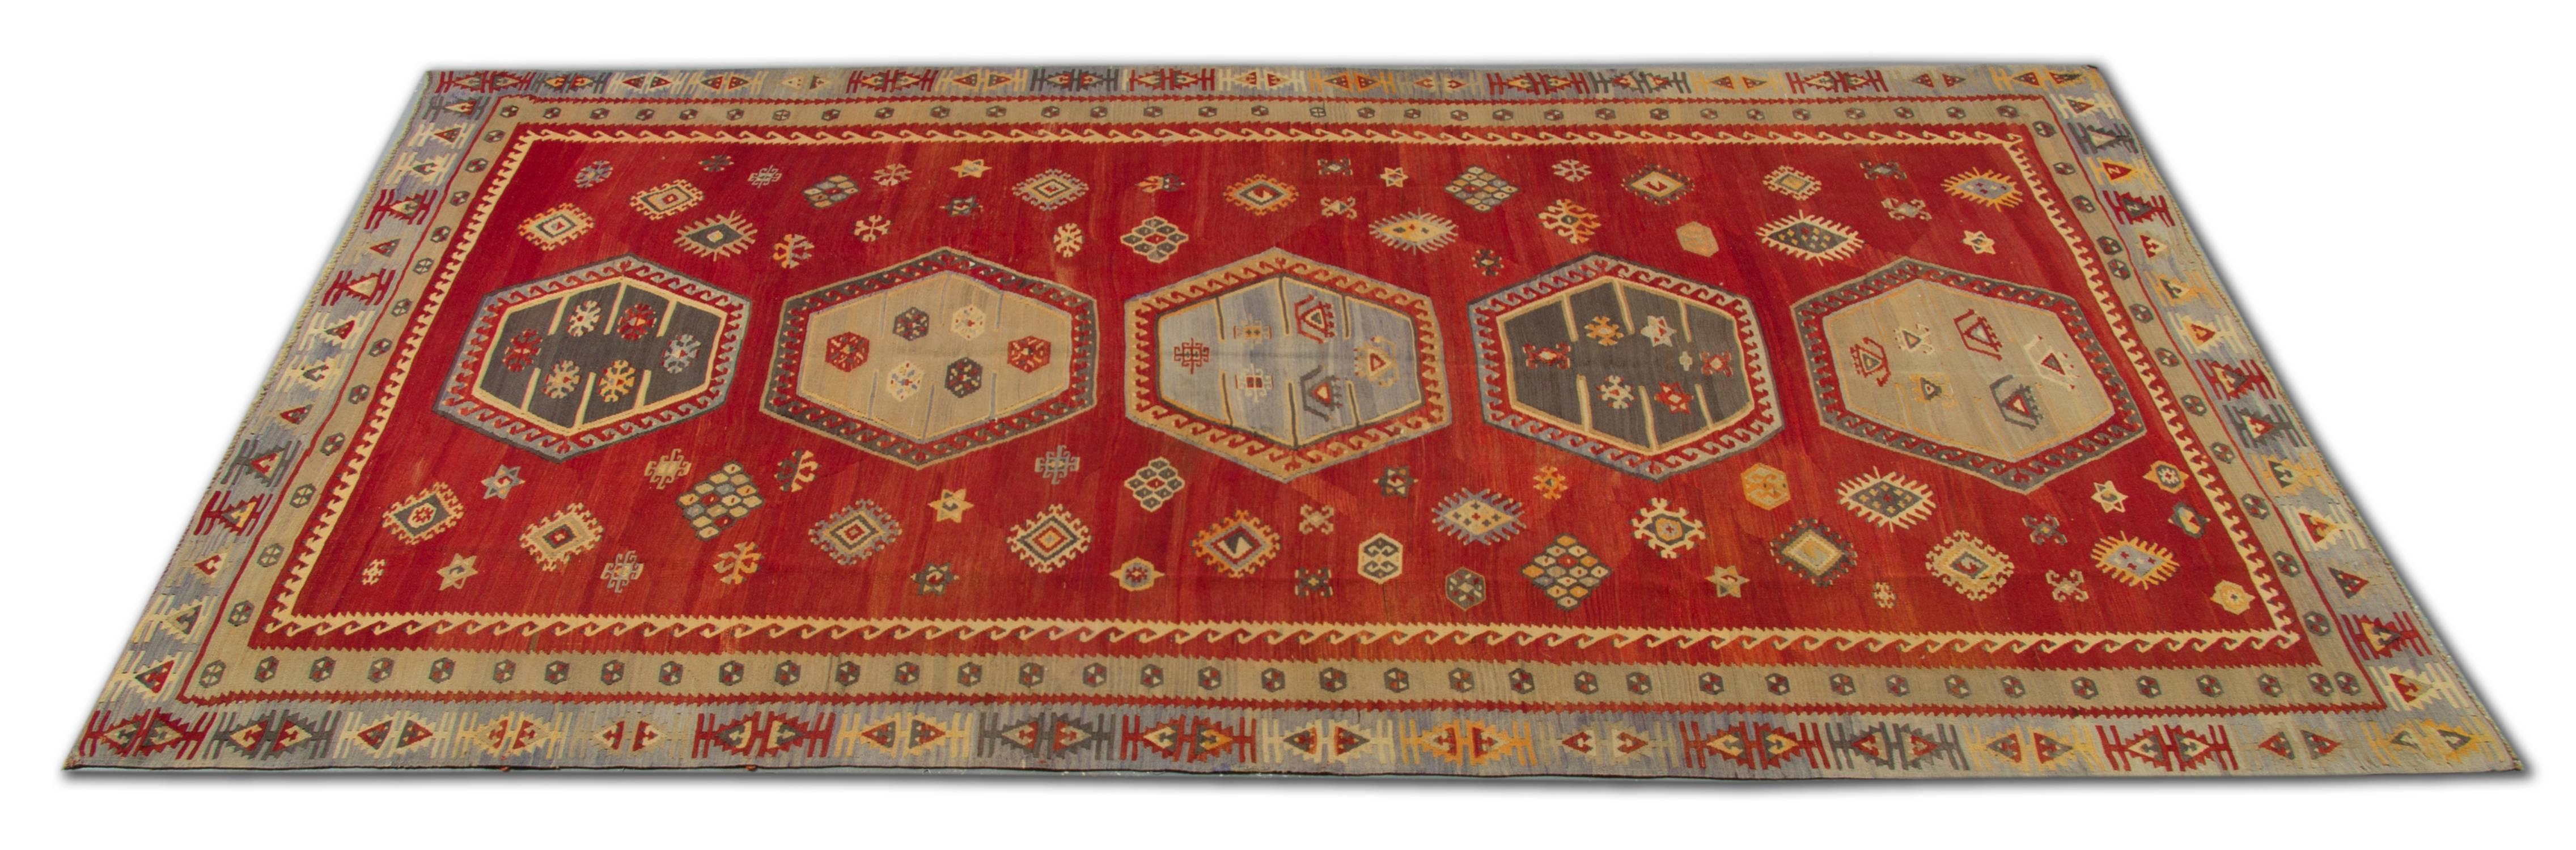 The handmade carpet Sarkisla Kilim rugs are one of the most decorative rugs, Turkish Kilim can be an additional element of design to one's home decor. Most Kilims can always be in harmony with the interior and will be complementary with art and